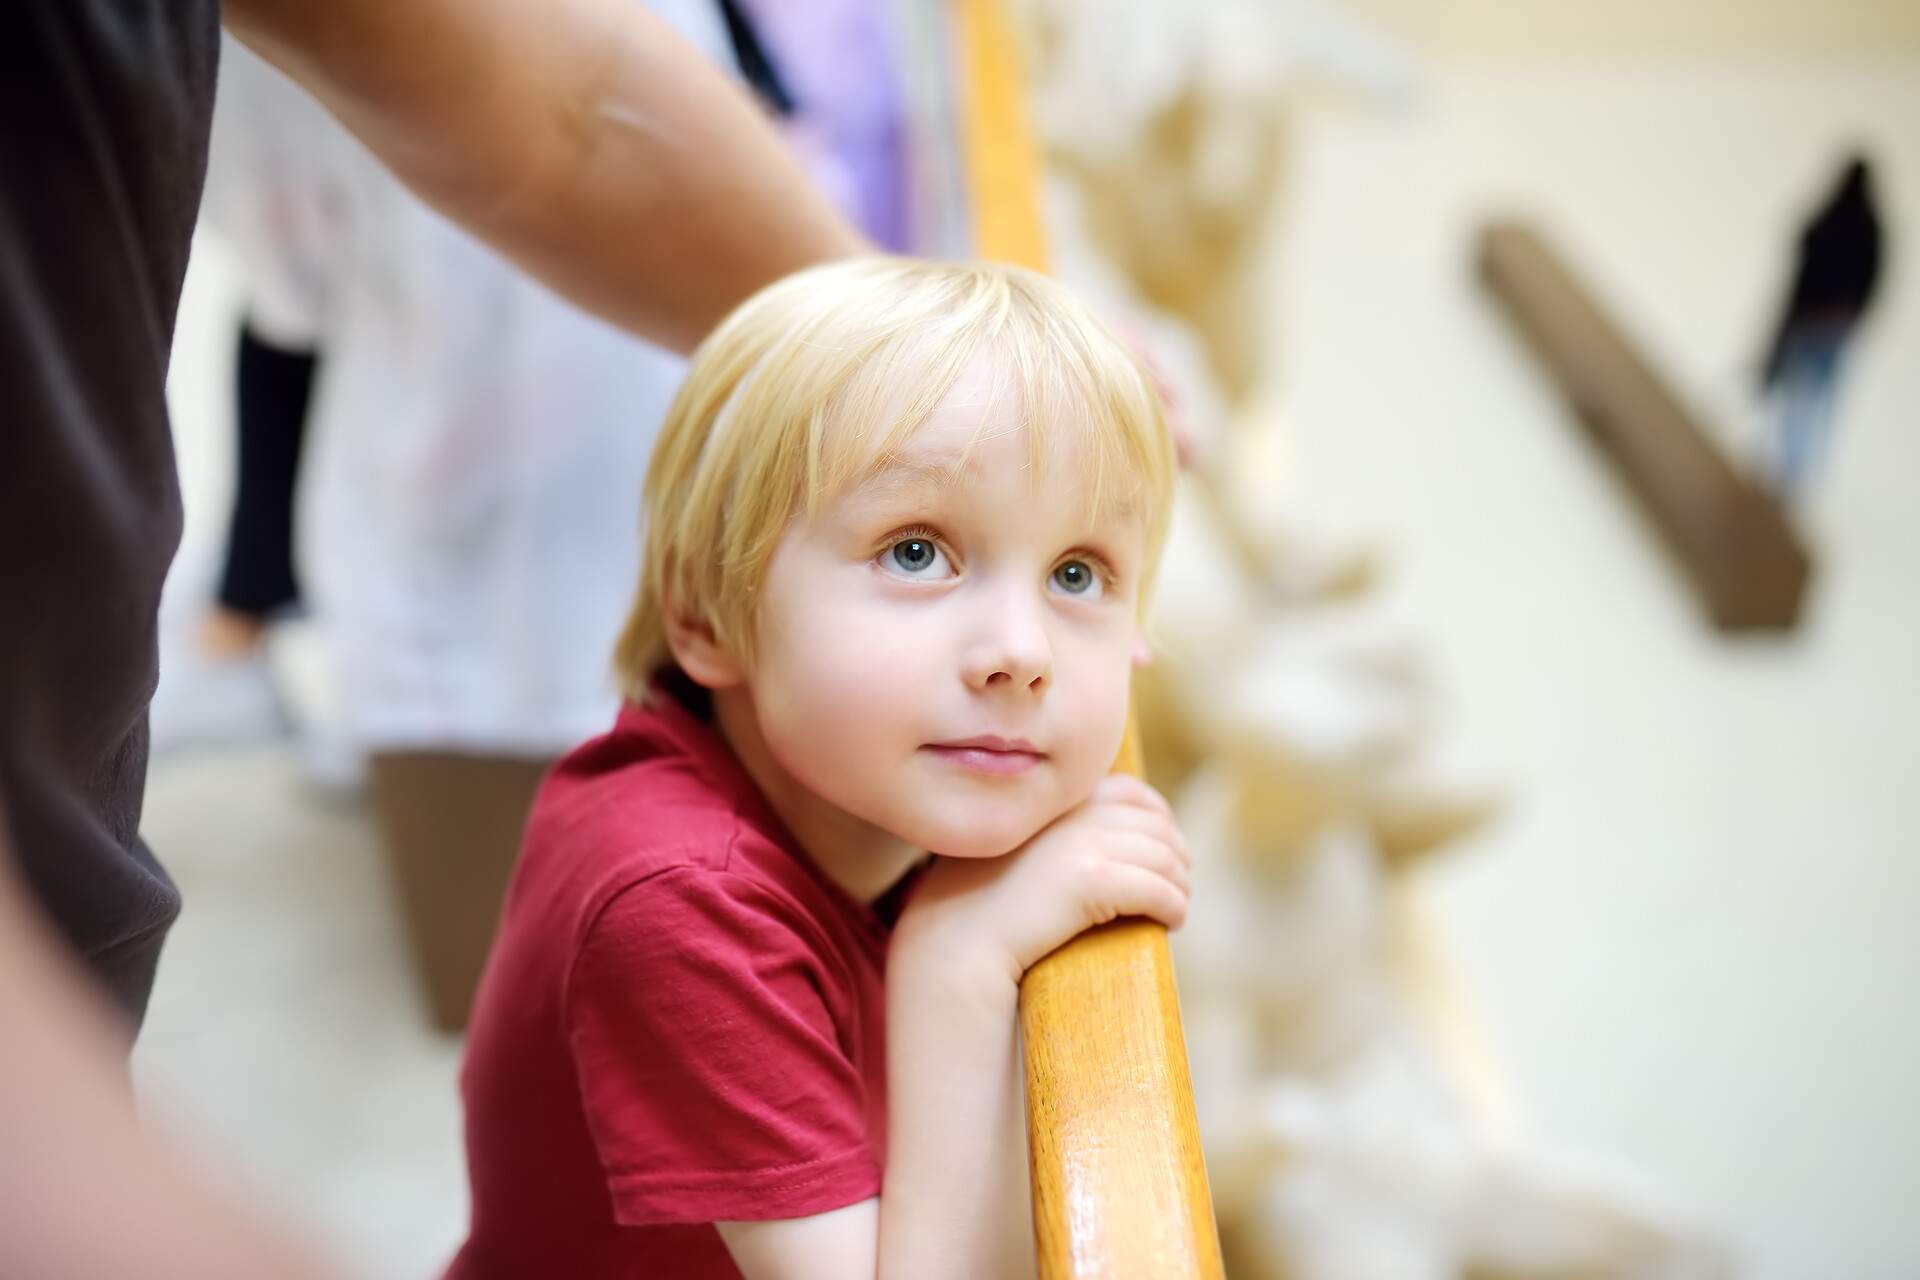 A young boy leaning on wooden hand rail while gazing upward.
